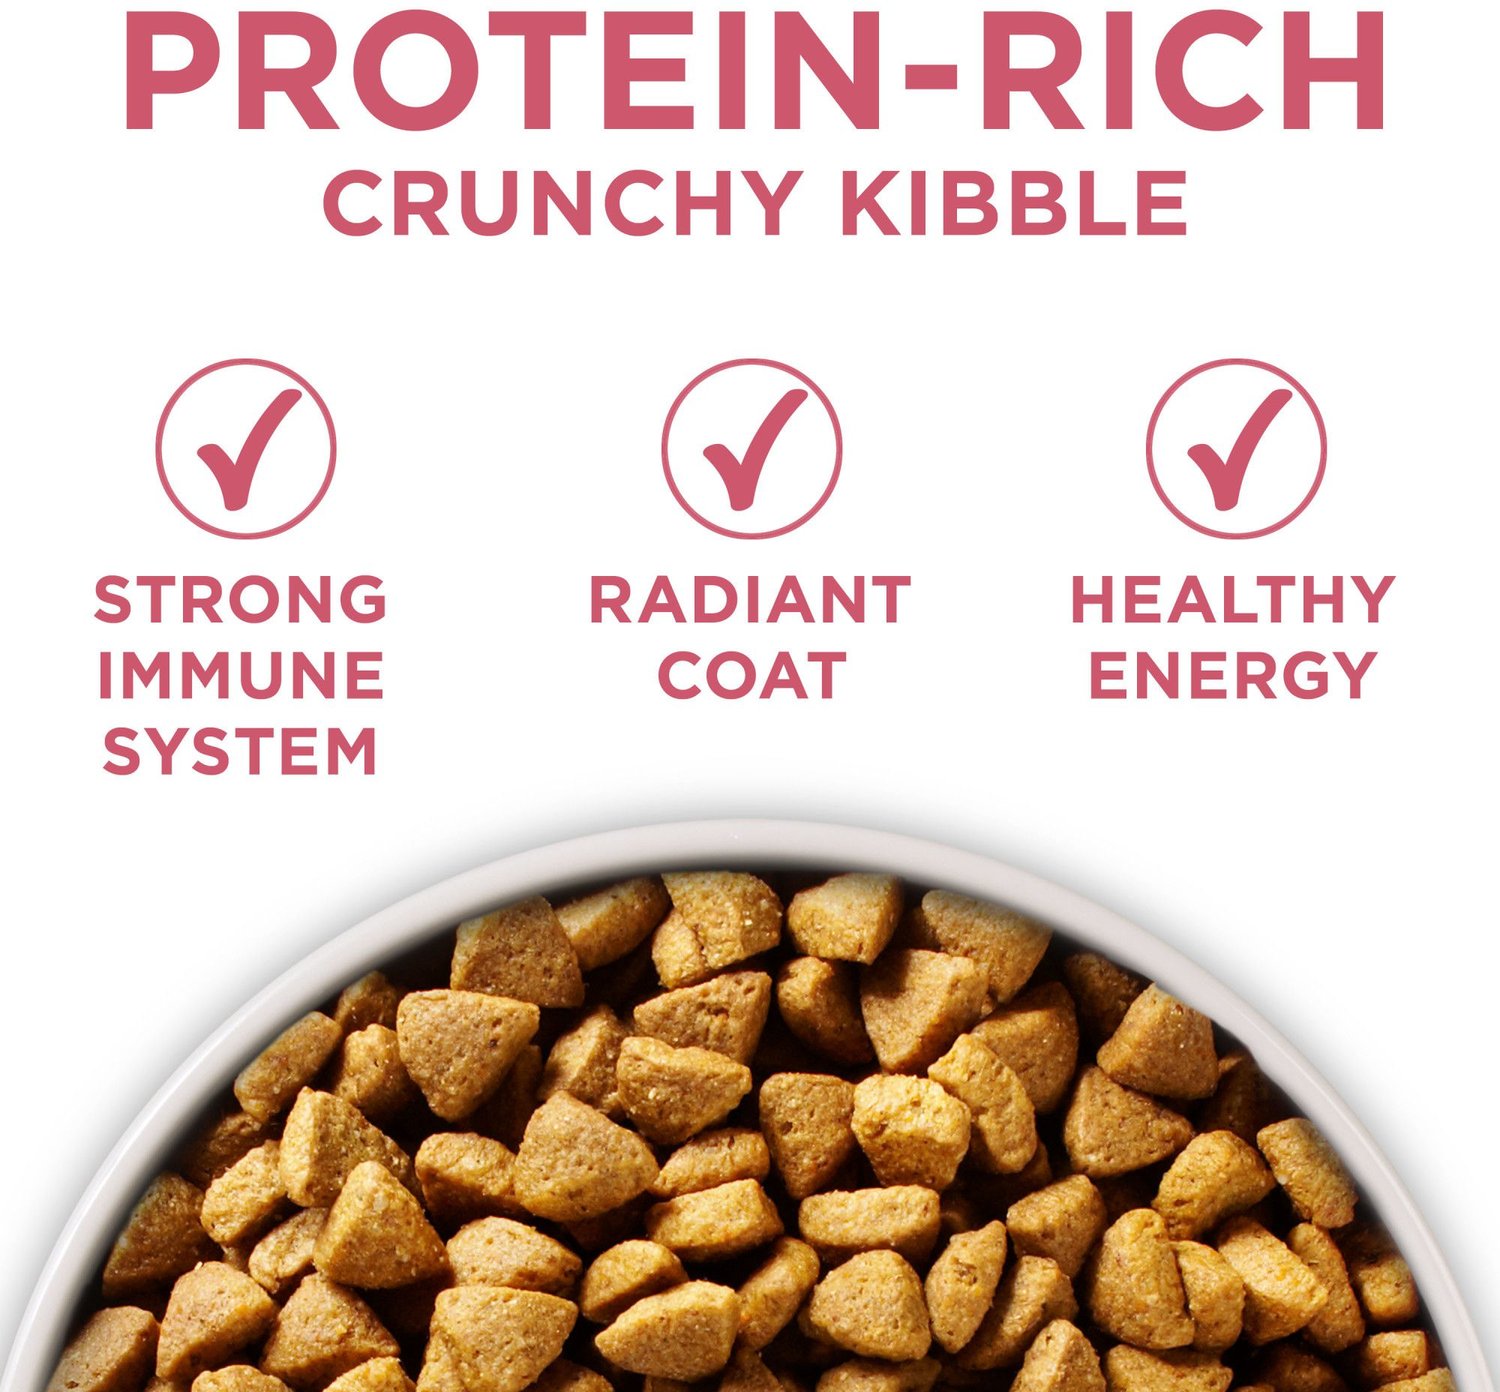 Purina One Puppy Food Chart